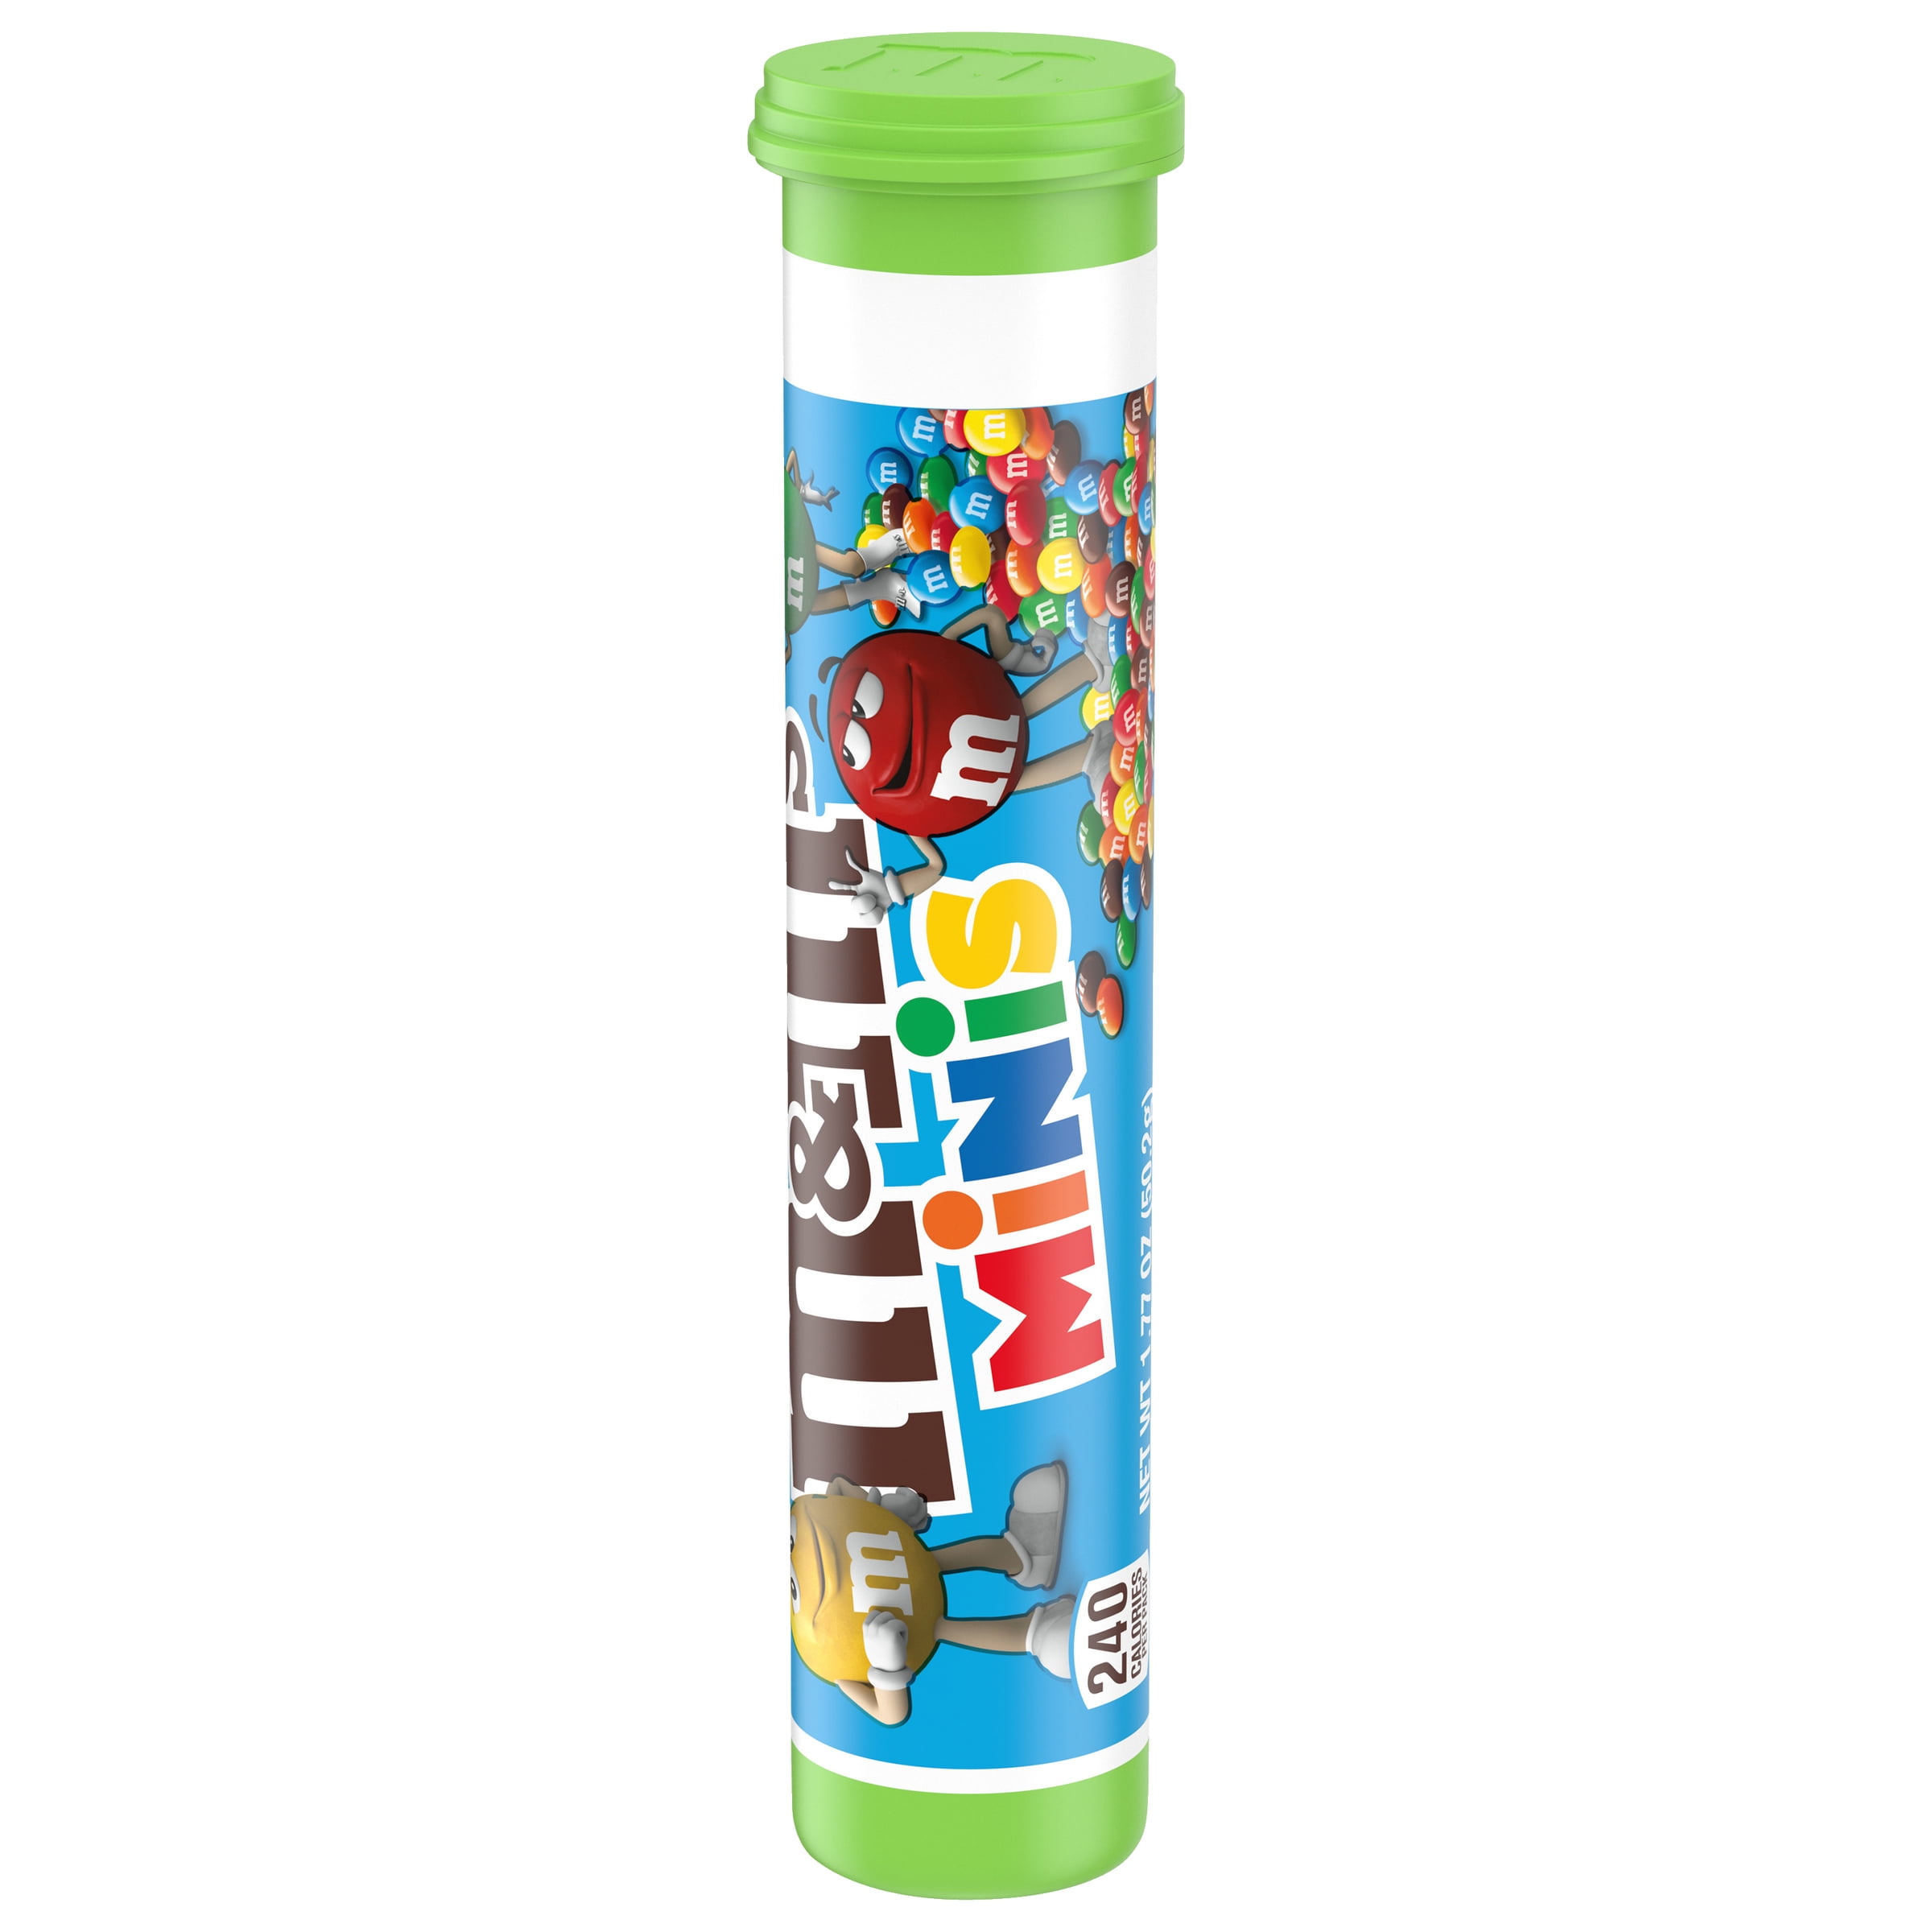  M&M minis assorted chocolate candy pack of 12 tubes